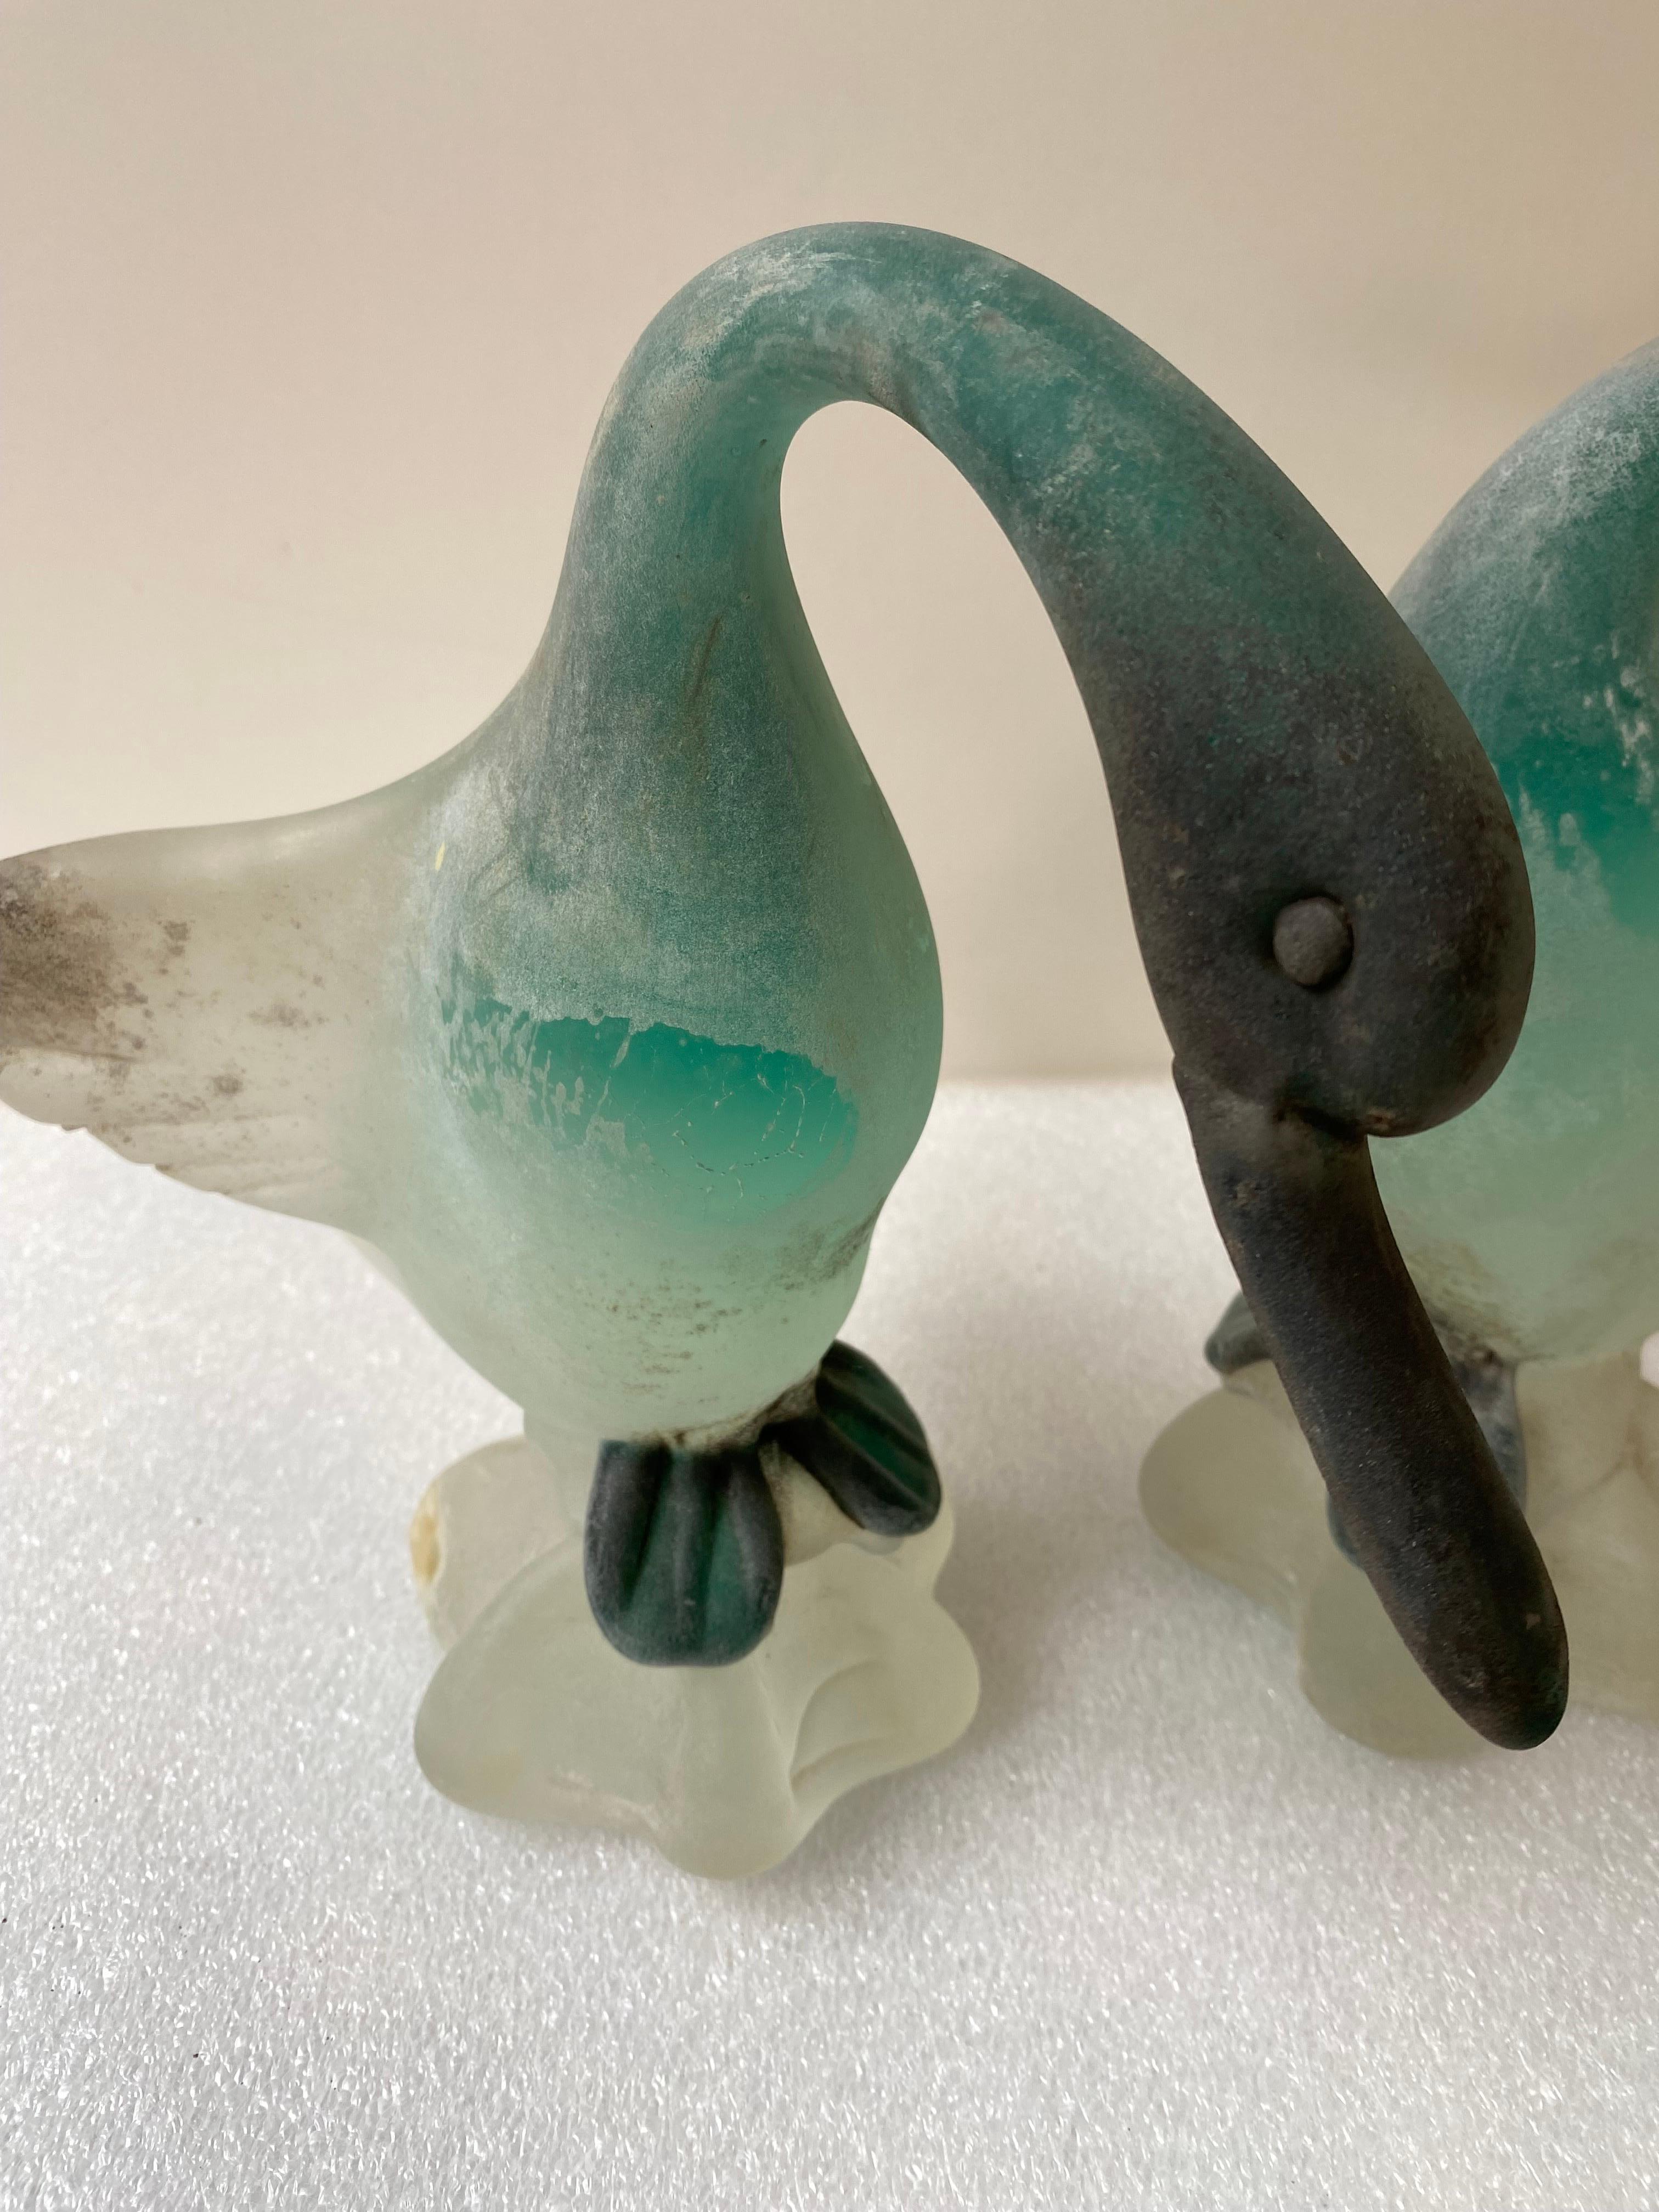 Pair of Scavo Cenedese ducks. In great shades of green. Done in the Scavo technique, designed to give the look of finding a excavated piece long buried and forgotten. Designed by Antonio da Ros. Nice scale and size! In great condition!